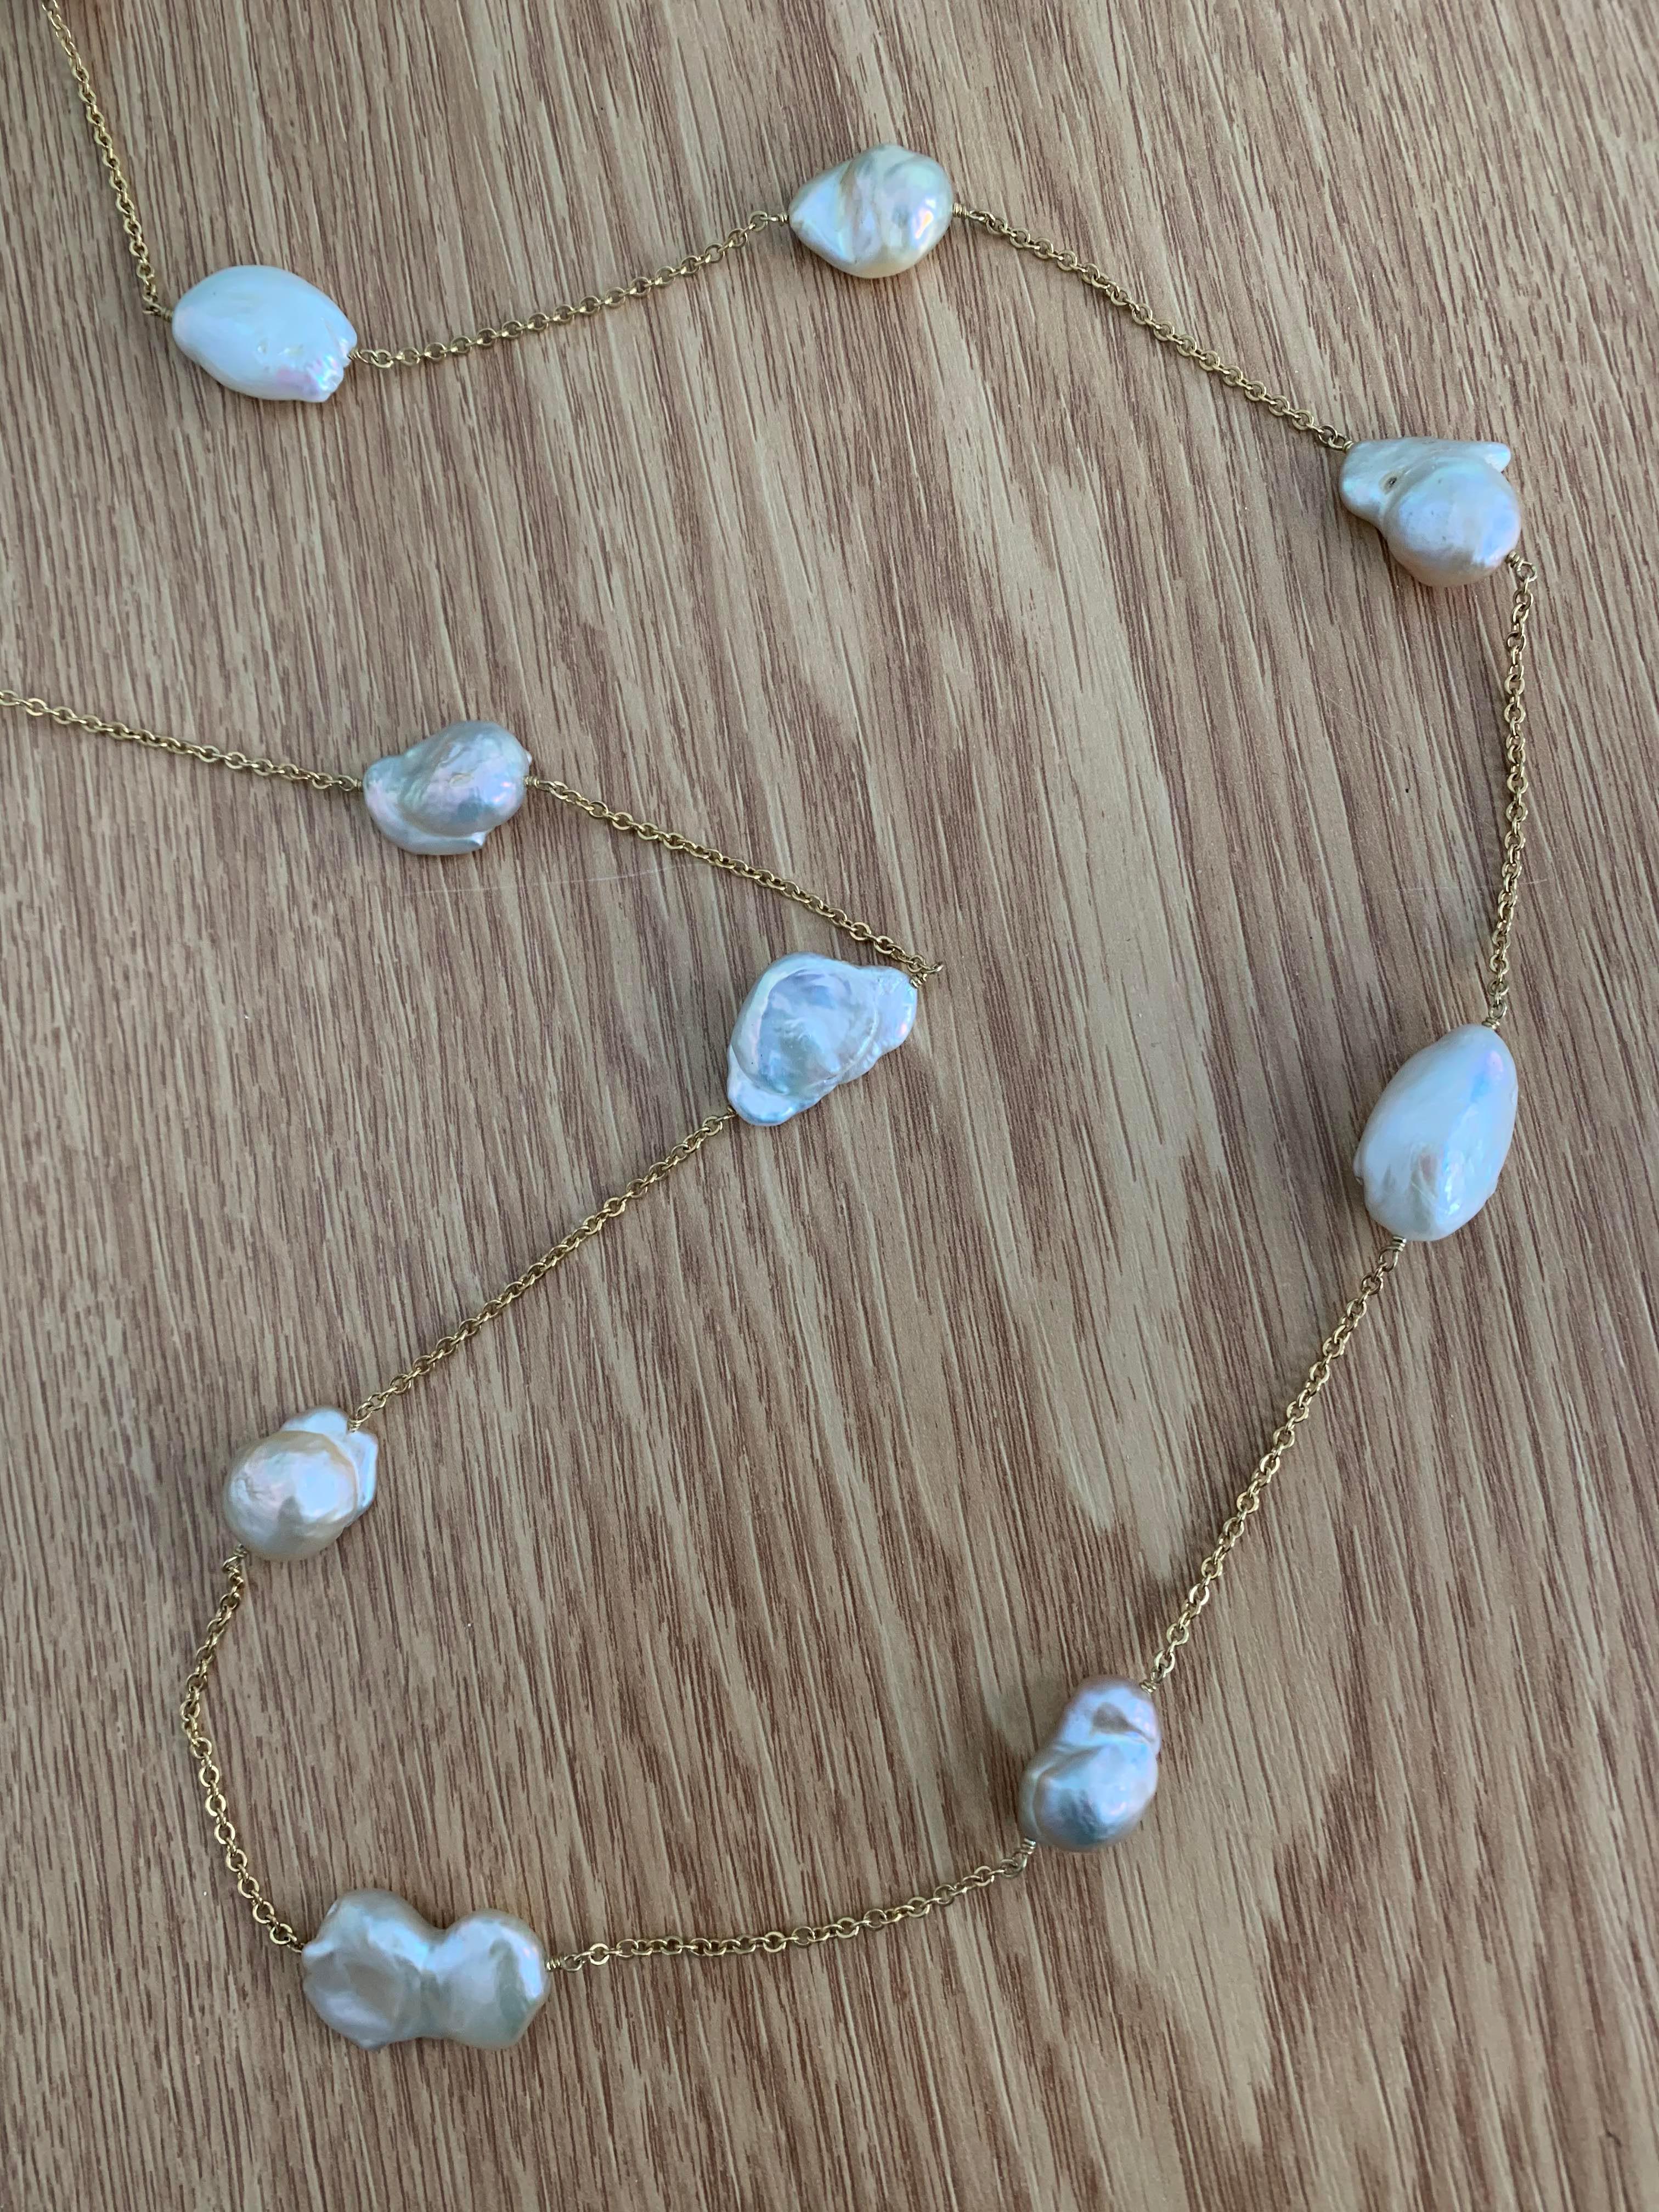 48 inch necklace